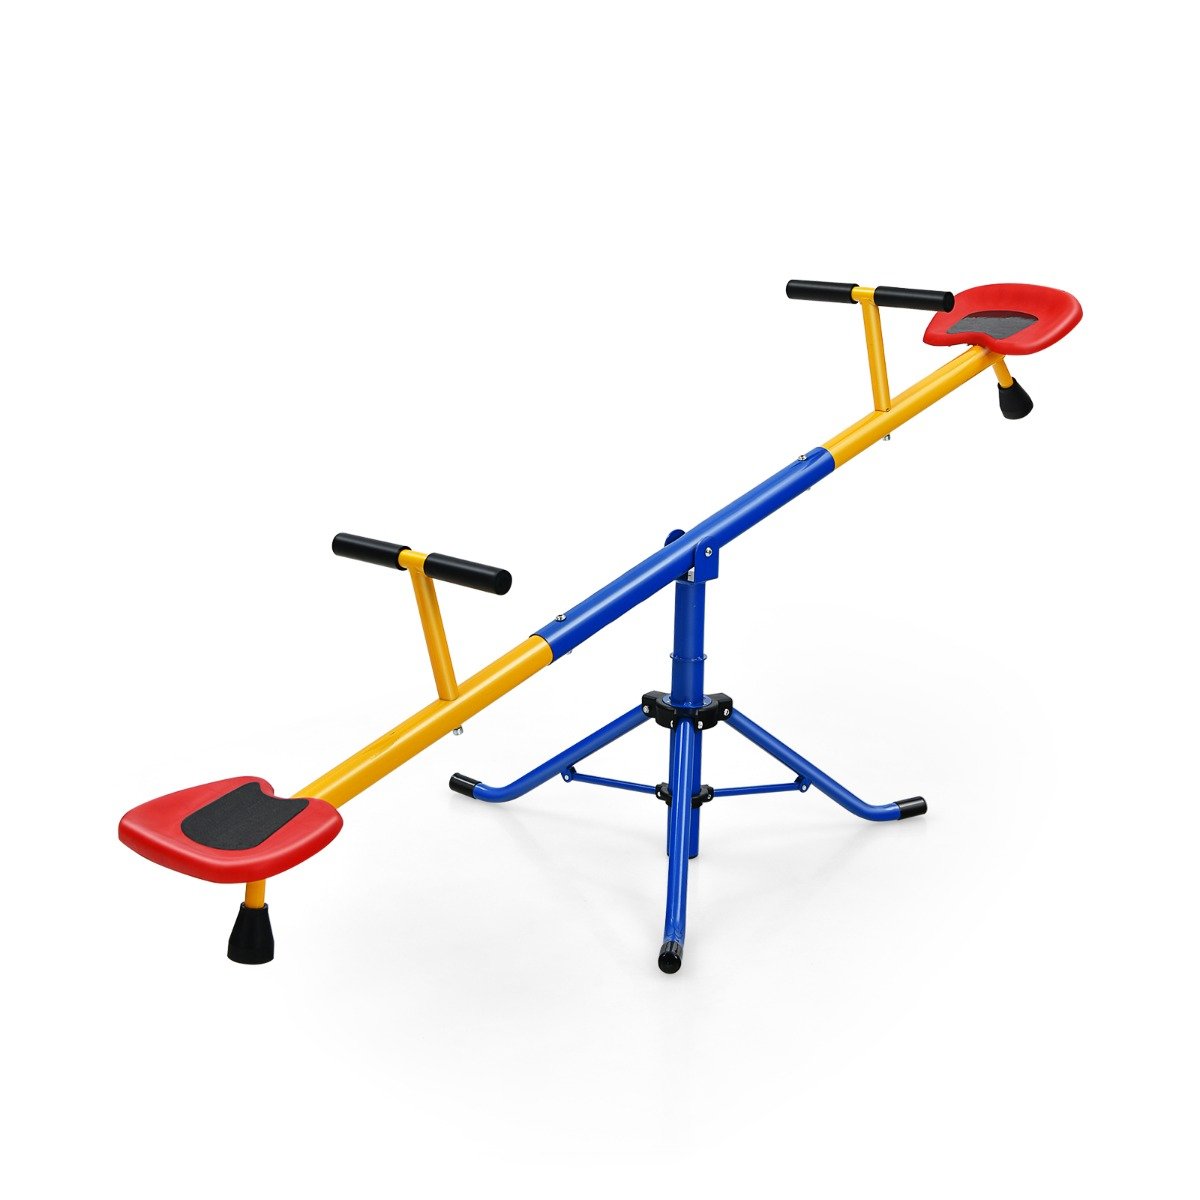 Spinning Seesaw with Stopper Legs - Buy at Kids Mega Mart